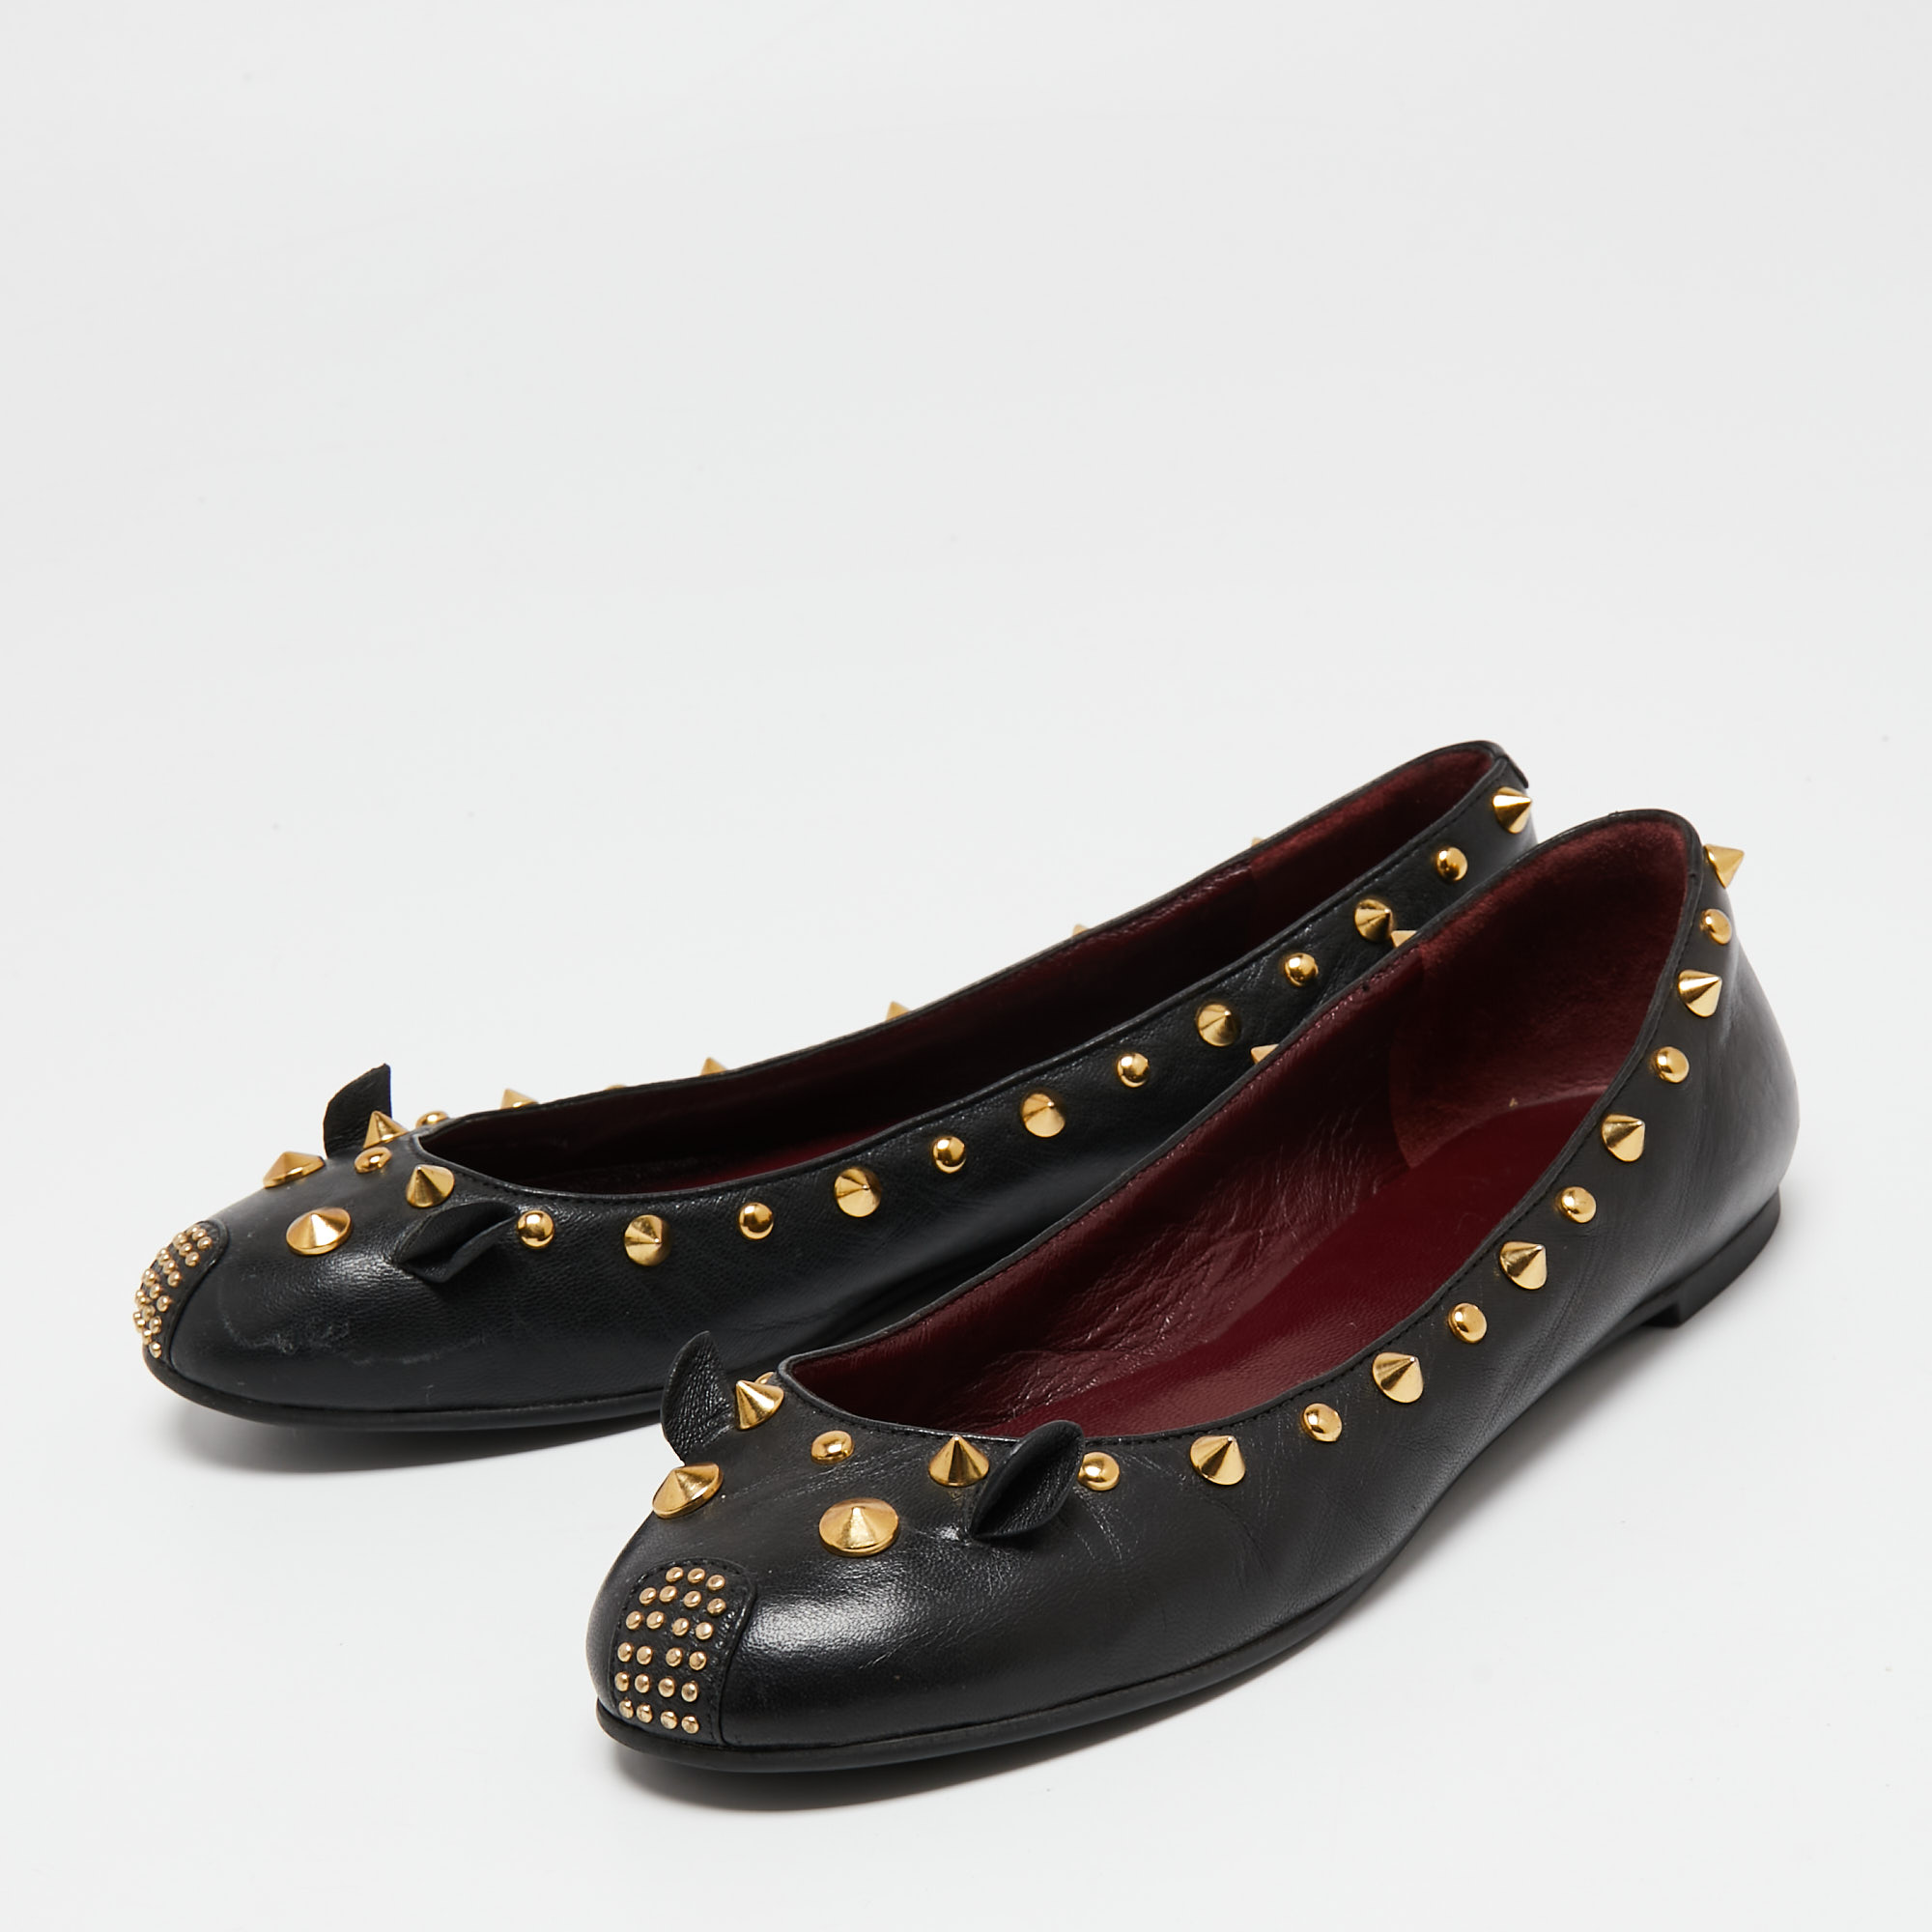 

Marc by Marc Jacobs Black Leather Spike Mouse Ballet Flats Size